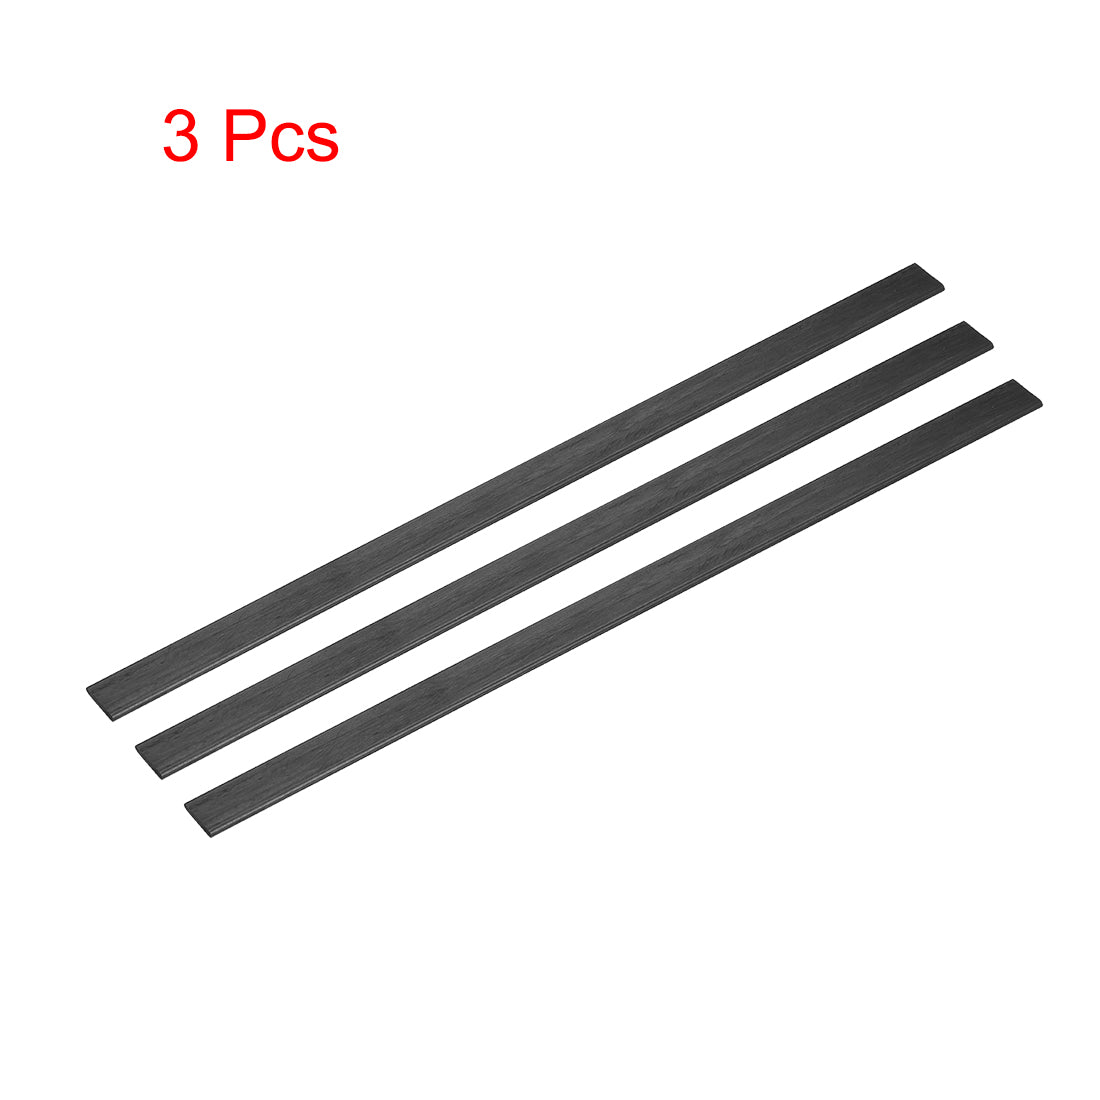 uxcell Uxcell Carbon Fiber Strip Bars 2x10mm 400mm Length Pultruded Carbon Fiber Strips for Kites, RC Airplane 3 Pcs